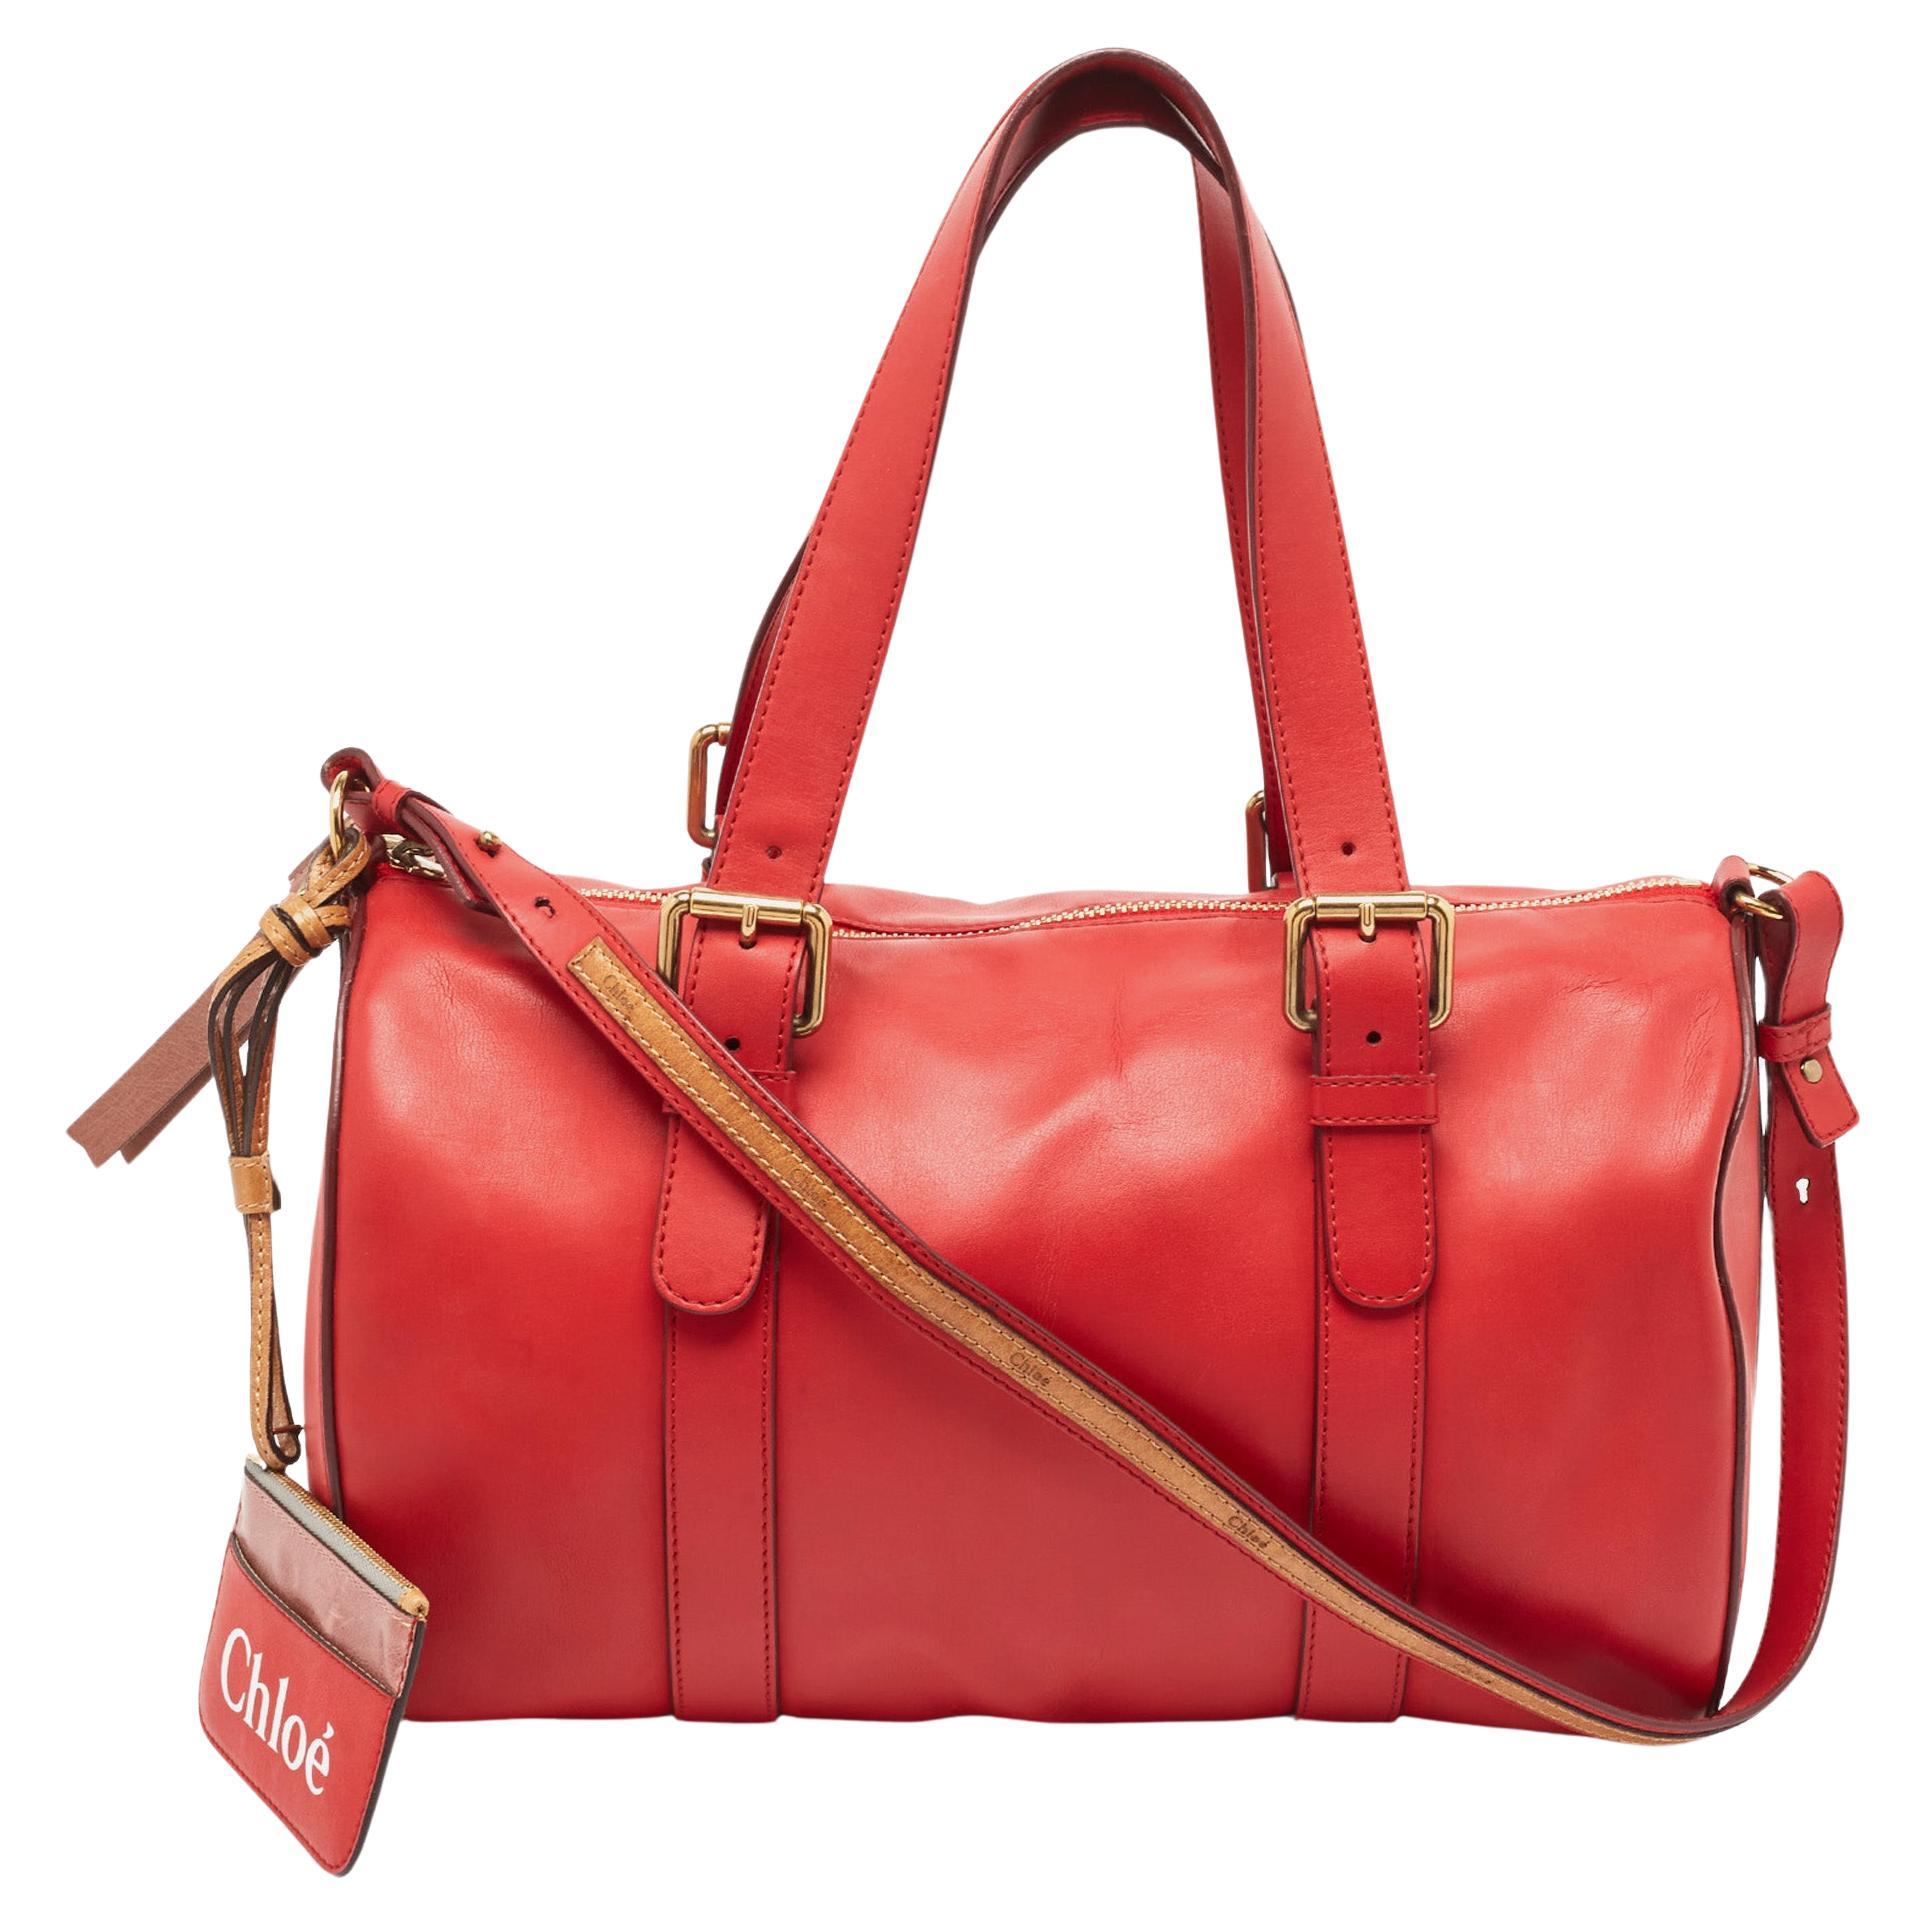 Chloe Red/Brown Leather Buckle Duffel Bag For Sale